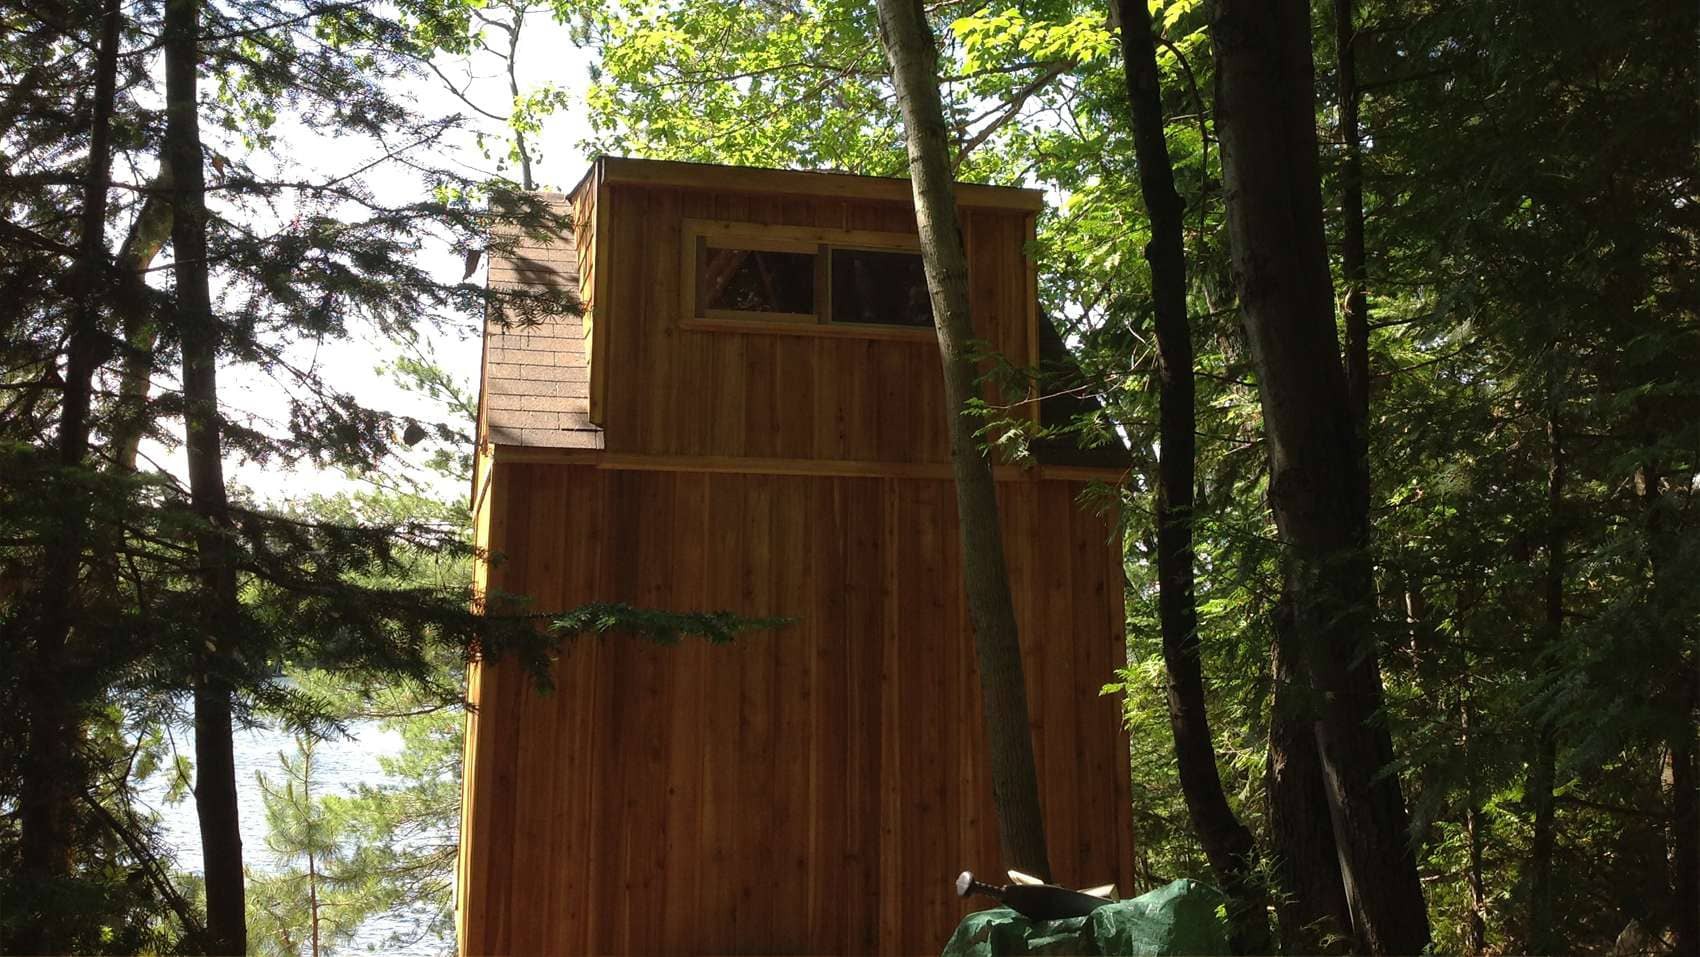 Custom Bala bunkie 10 x 10 with double french doors in Ontario. ID number 165870-7